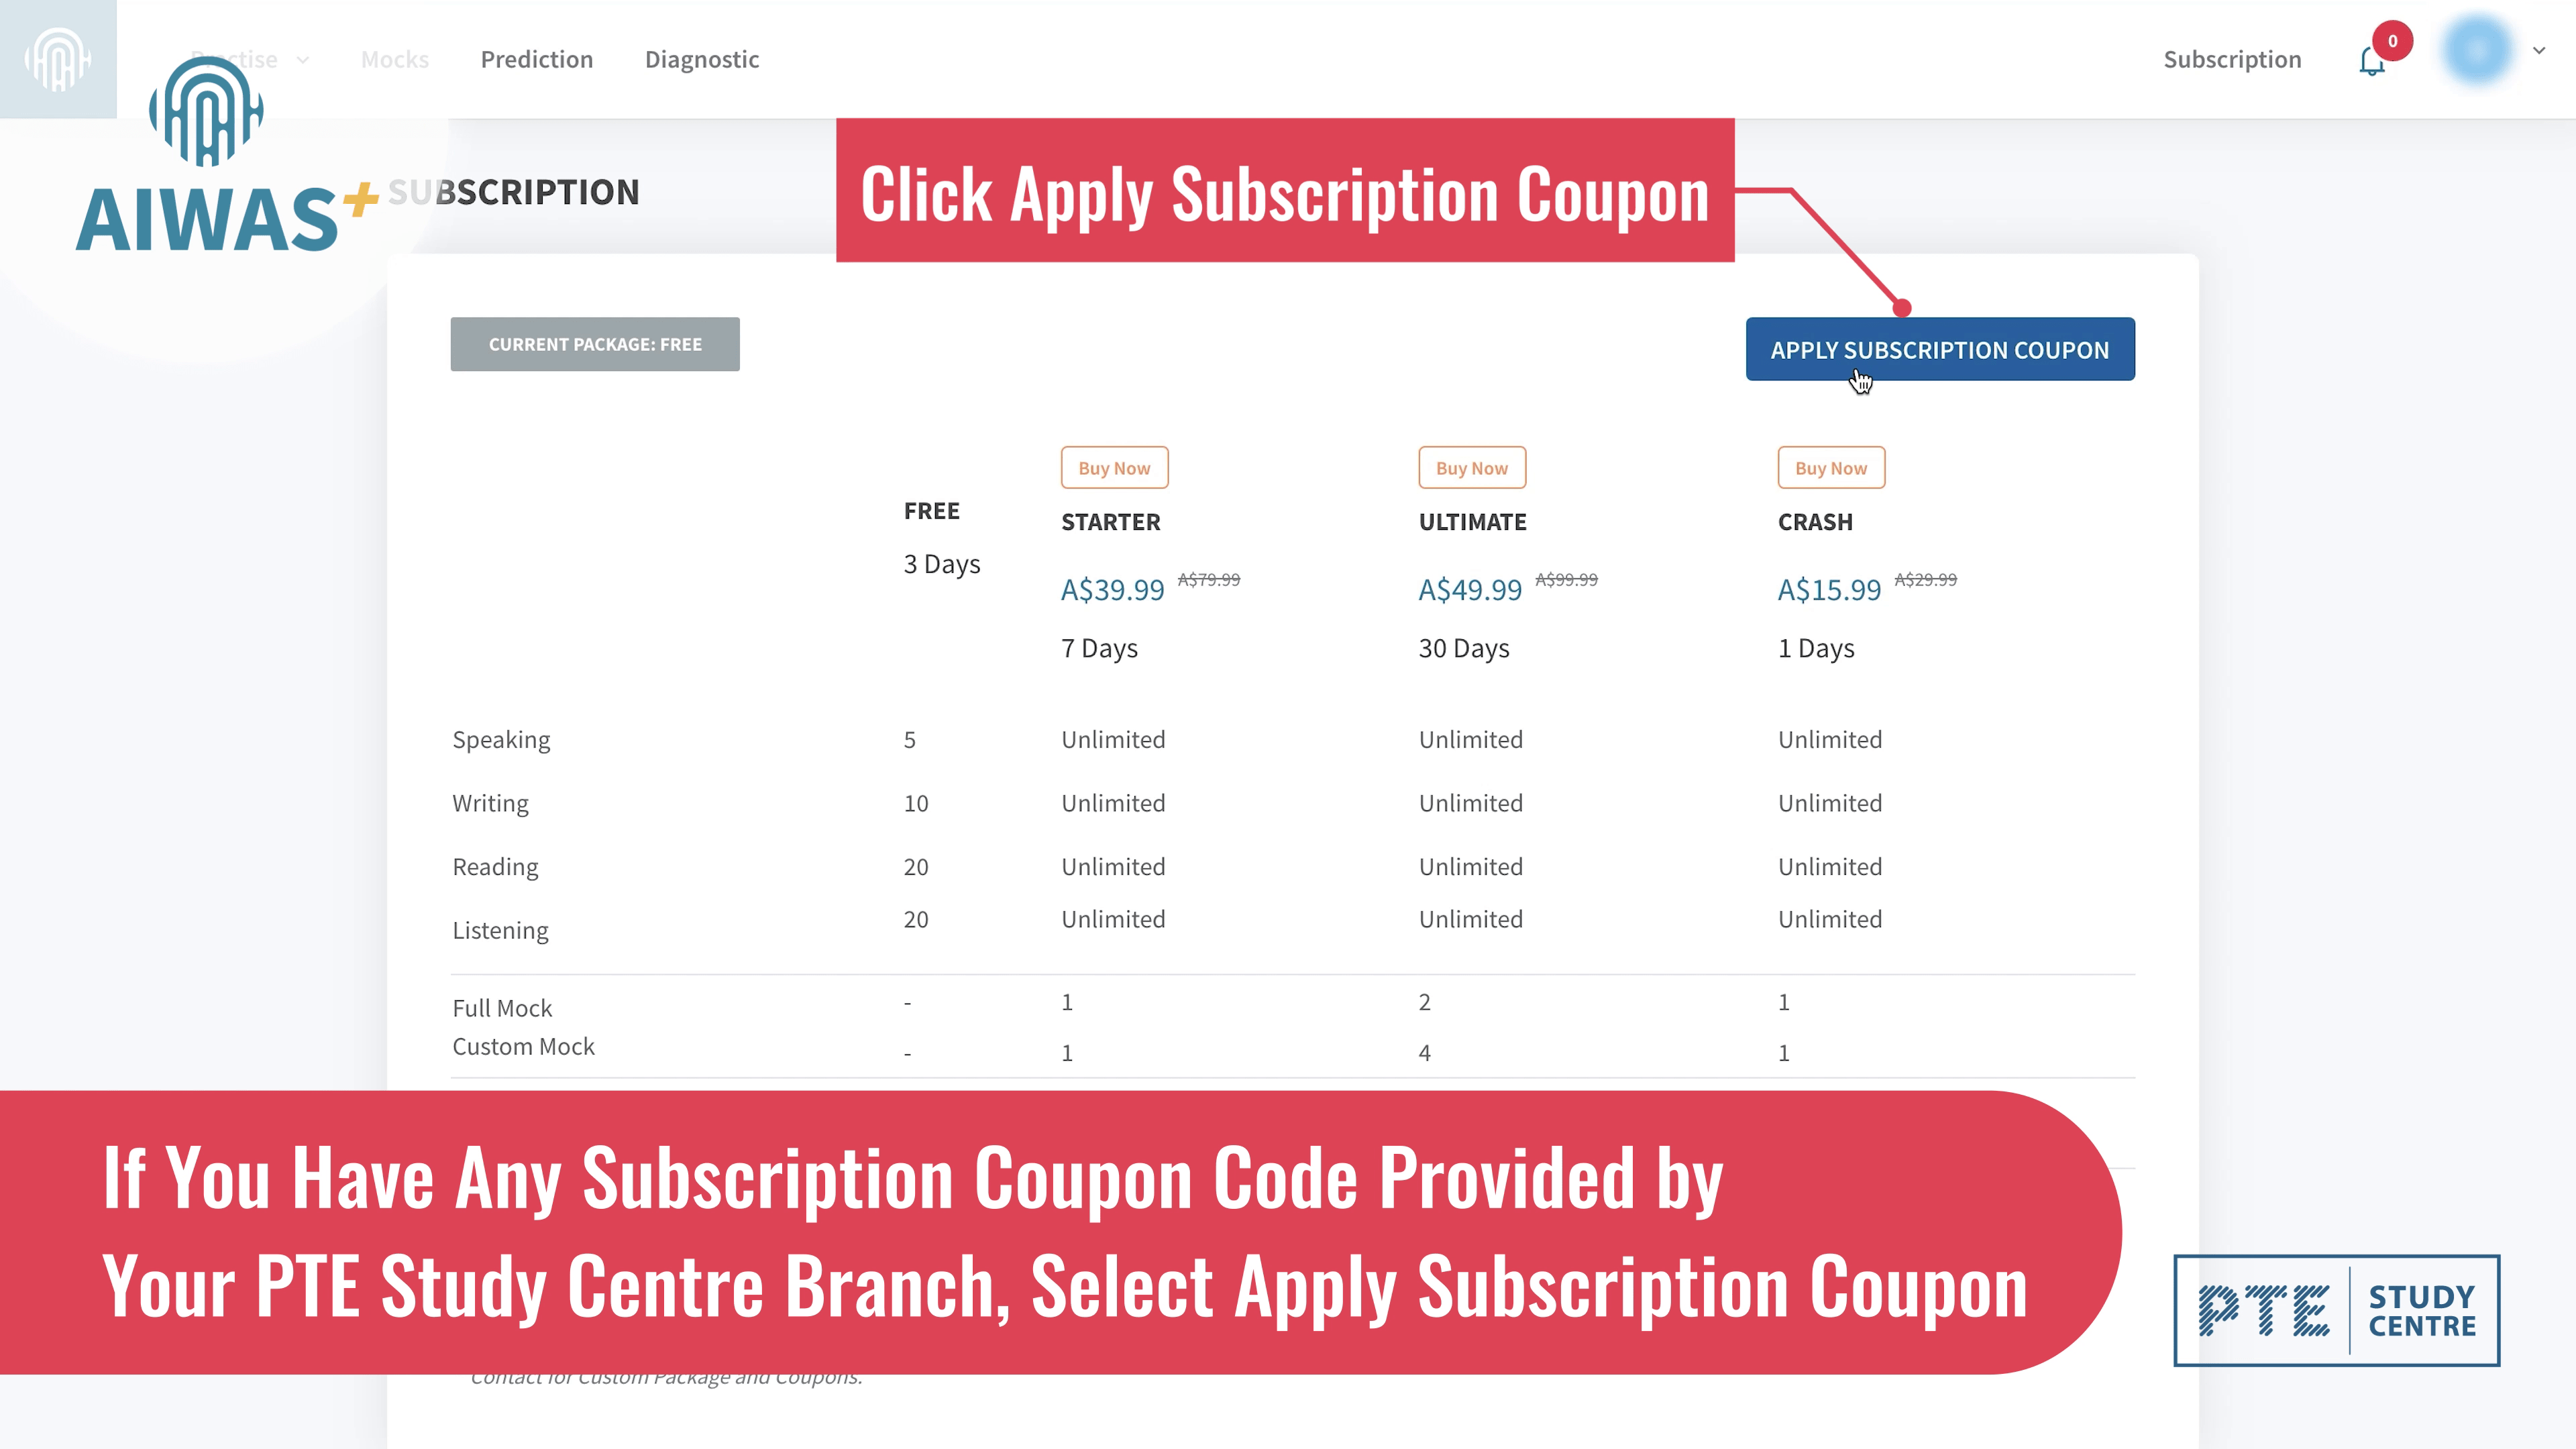 Apply Subscription Coupon